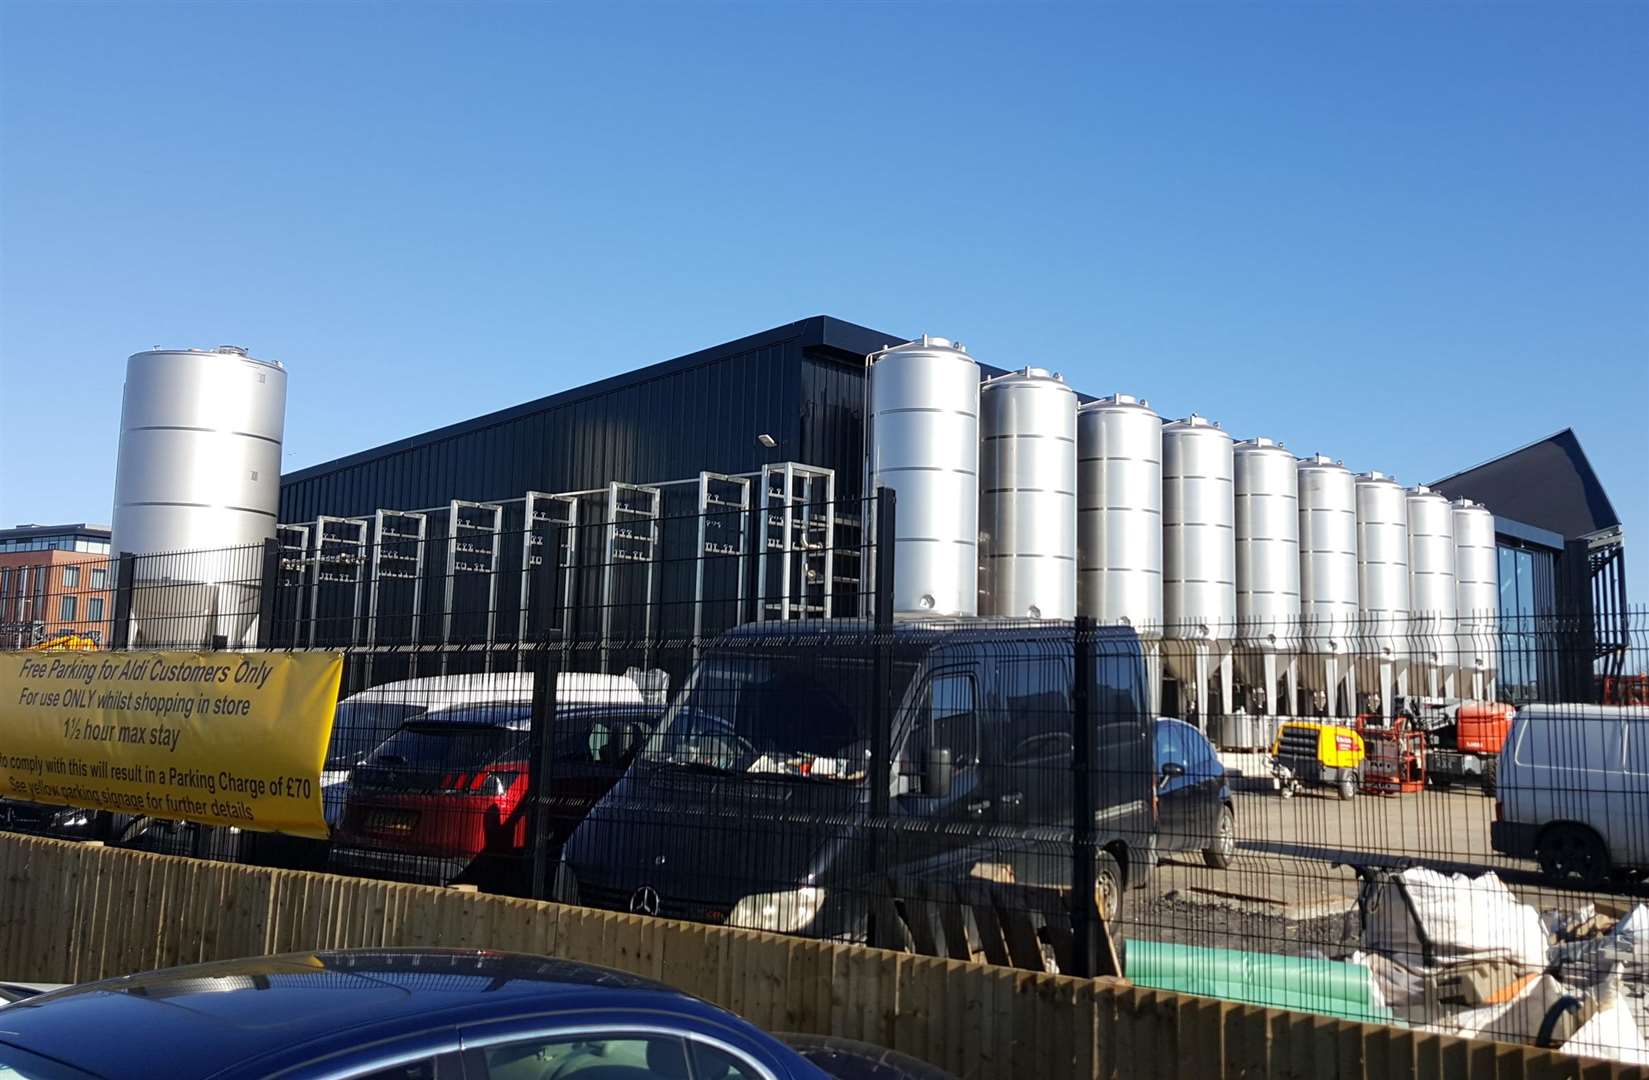 Work is progressing at the brewery, which is next to Aldi in Victoria Road